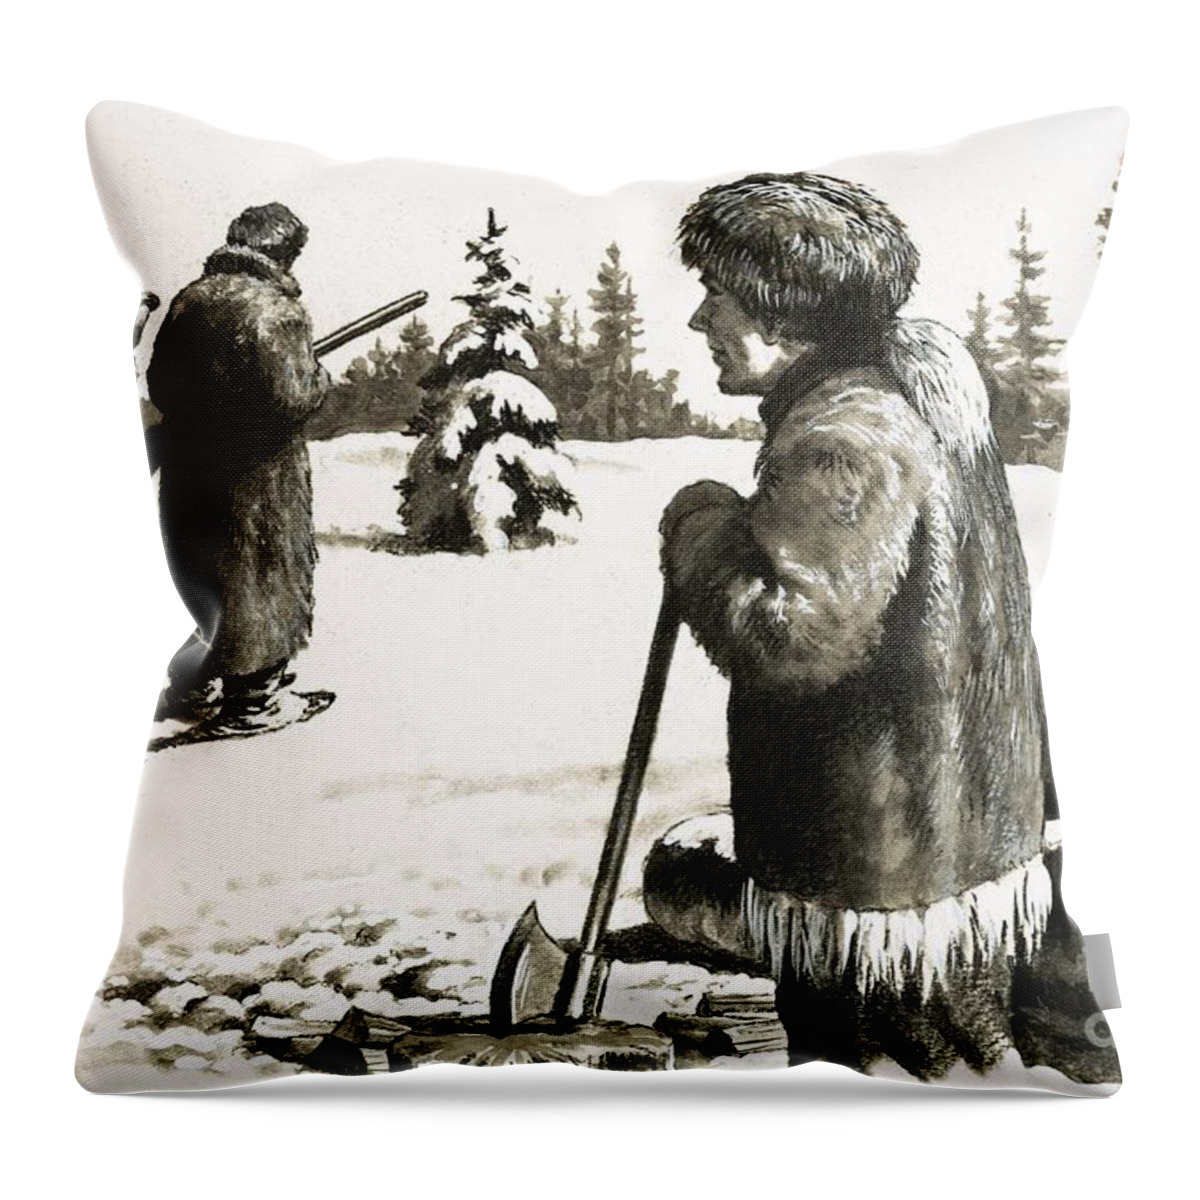 Outposts Of The Empire: A Short Walk To Death Axe Throw Pillow featuring the painting Outposts Of The Empire A Short Walk To Death by Cl Doughty